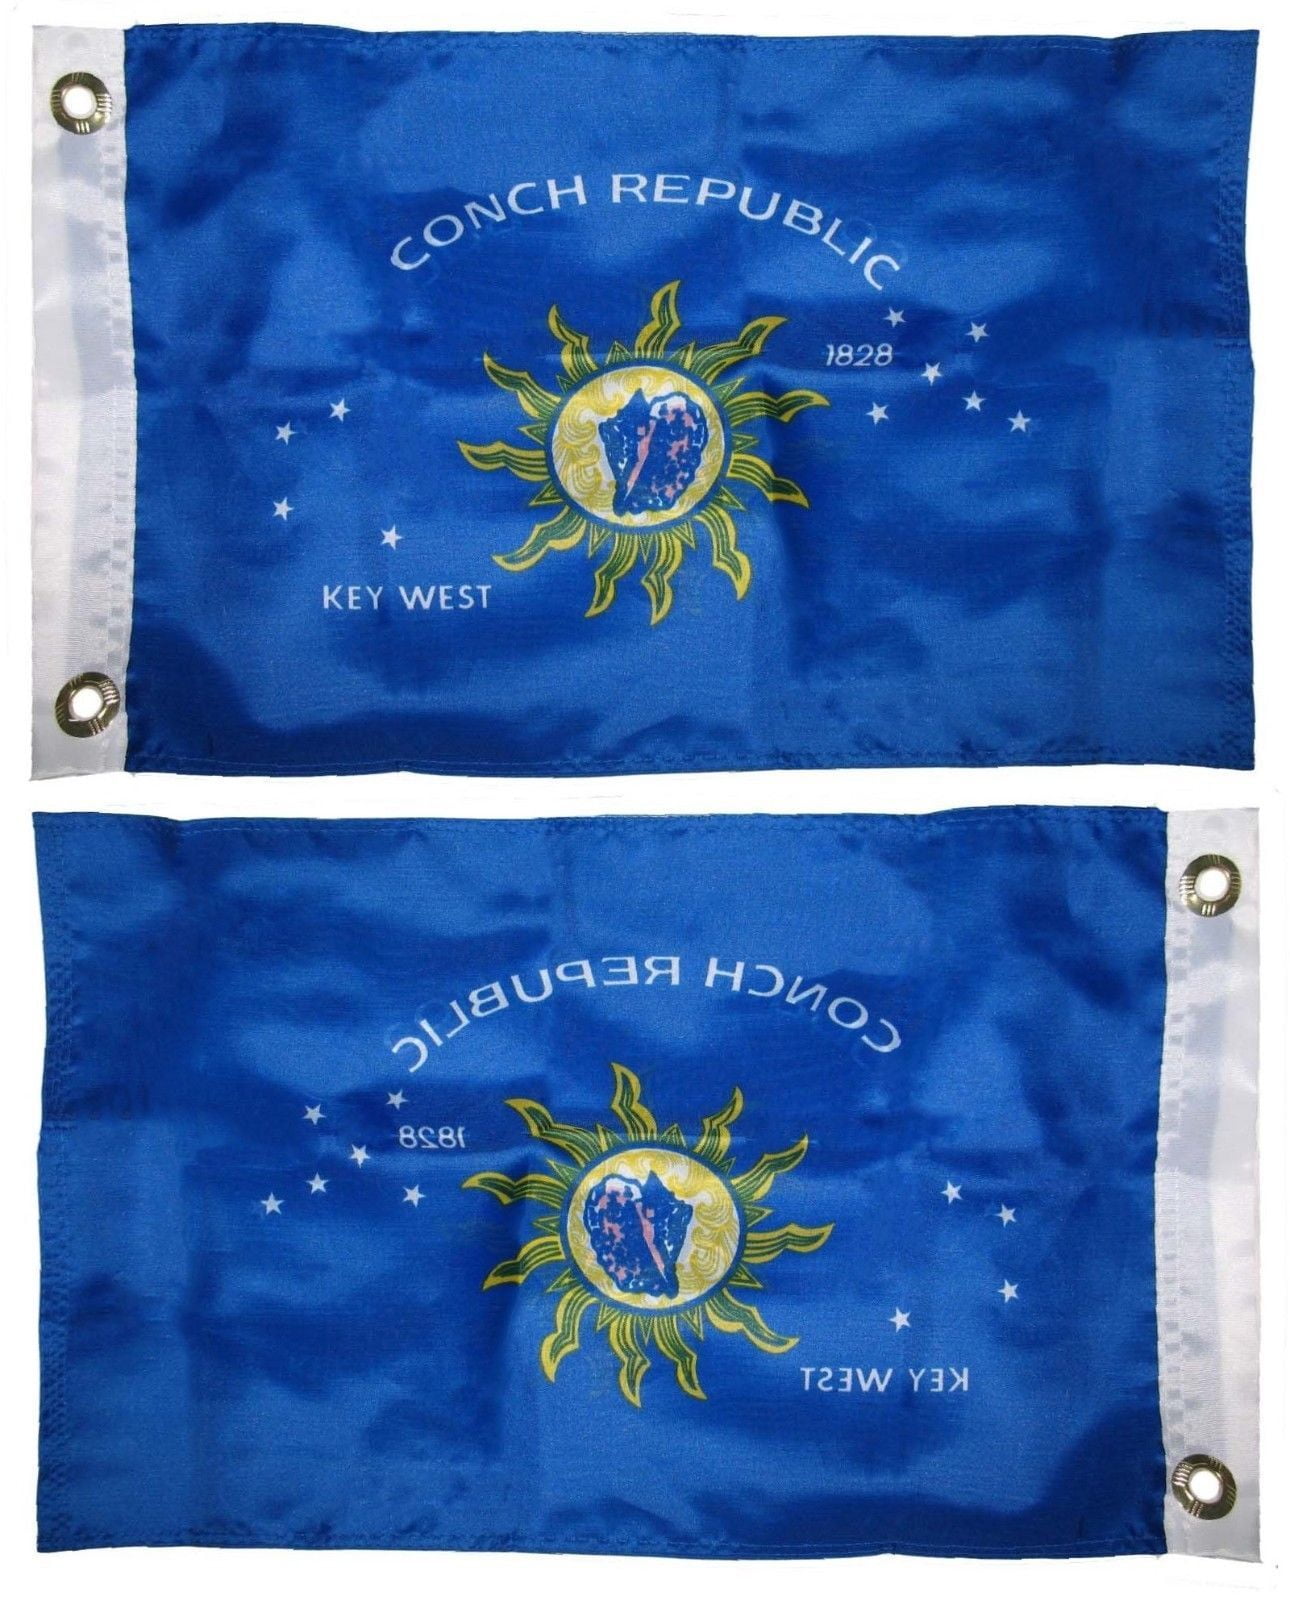 12x18 Embroidered Key West Conch Republic Double Sided 2-ply Nylon Boat Flag 